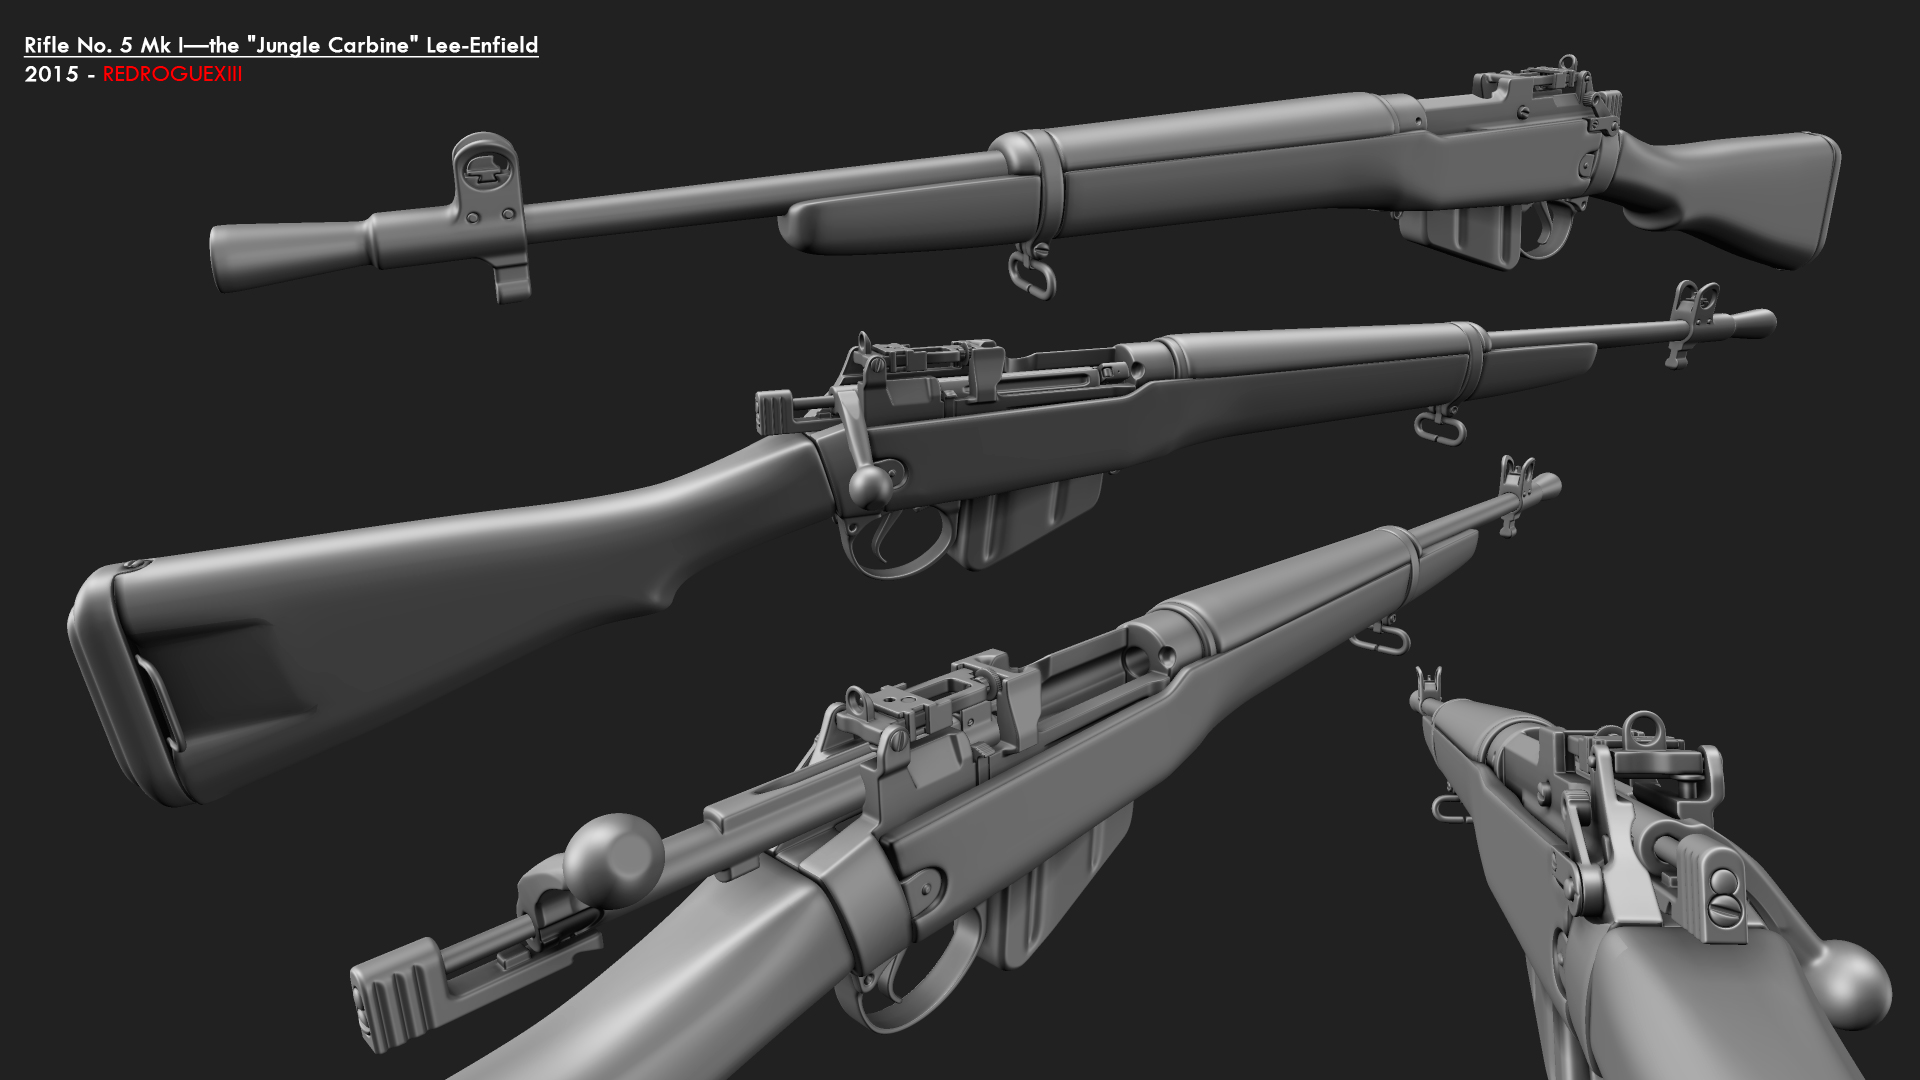 Lee-Enfield   Jungle Carbine by redroguexiii on DeviantArt